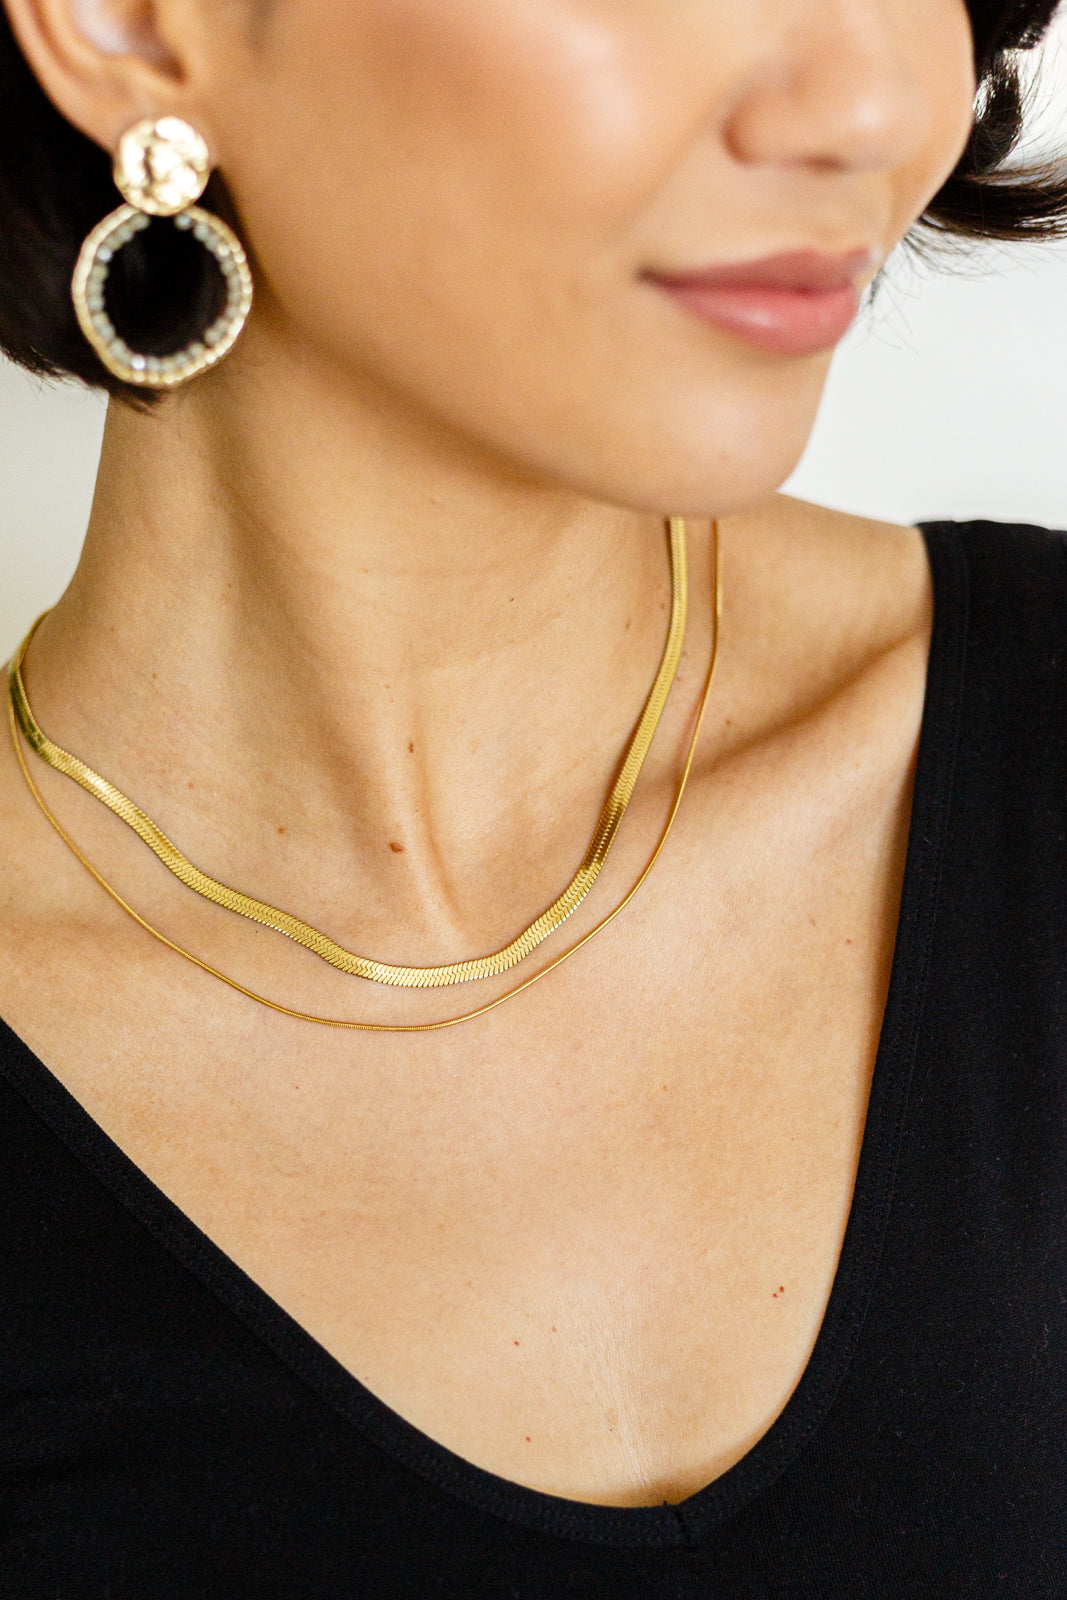 Waterproof Jewelry: Noontide Double Chain Necklace